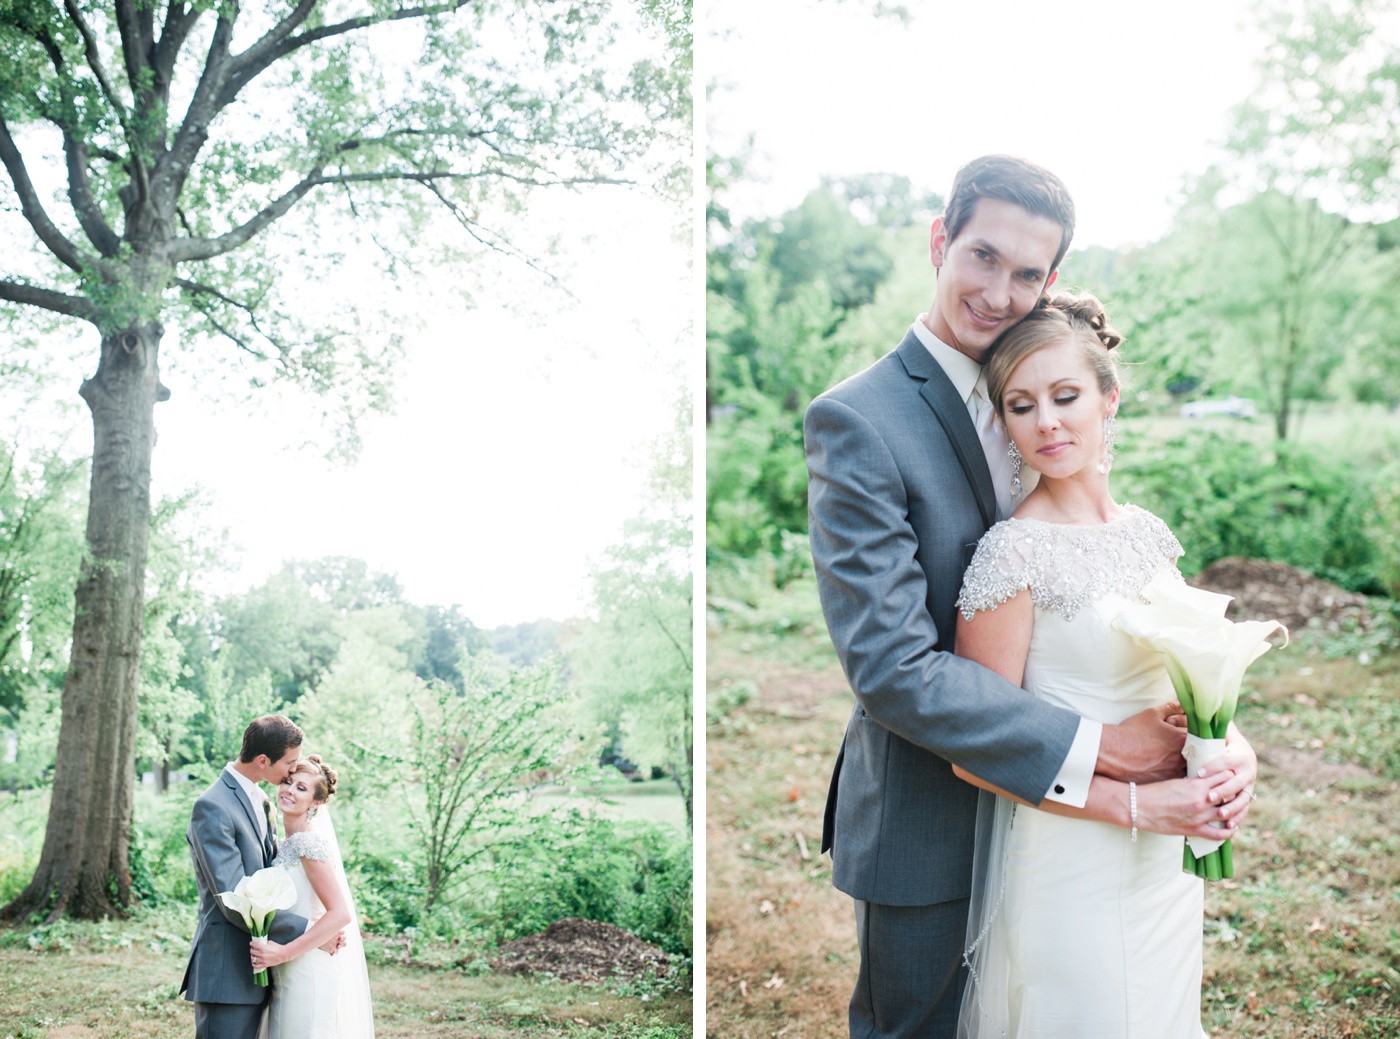 Goffle Brook Park - Paterson New Jersey Wedding Photographer - Alison Dunn Photography